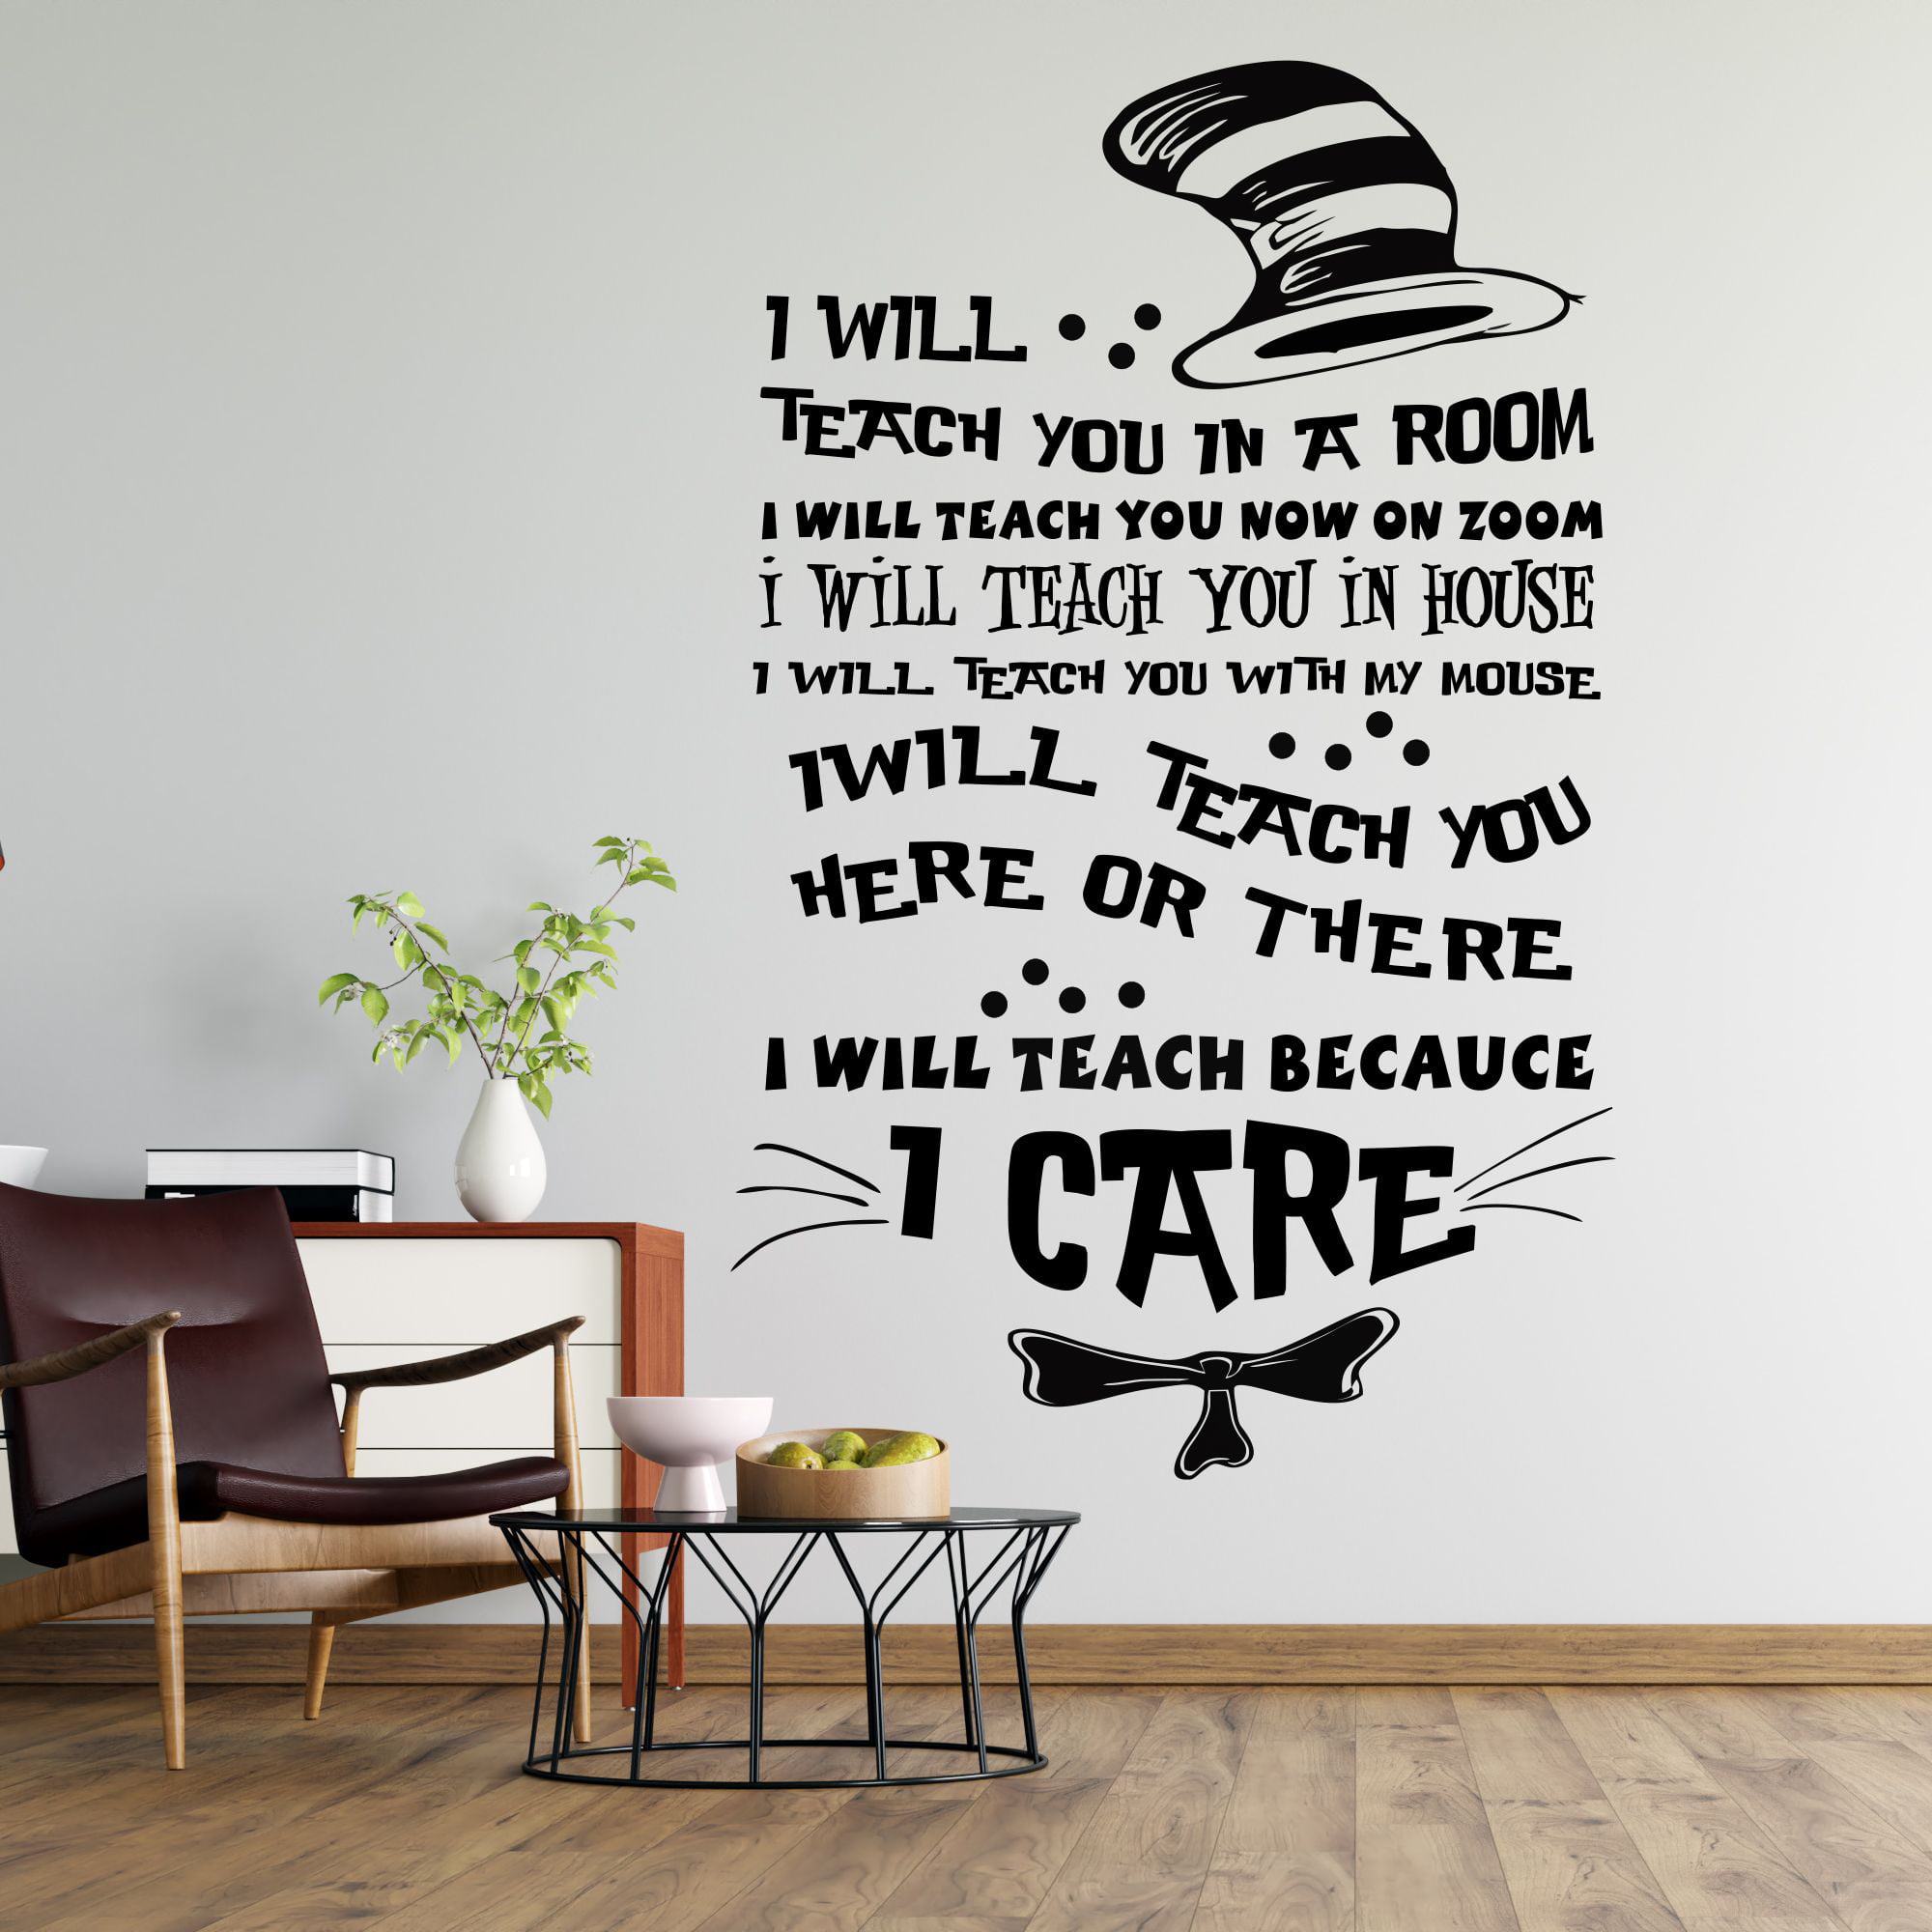 EVERYTHING STINKS TILL ITS FINISHED DR SEUSS WALL ART STICKERS DECAL QUOTES DS9 